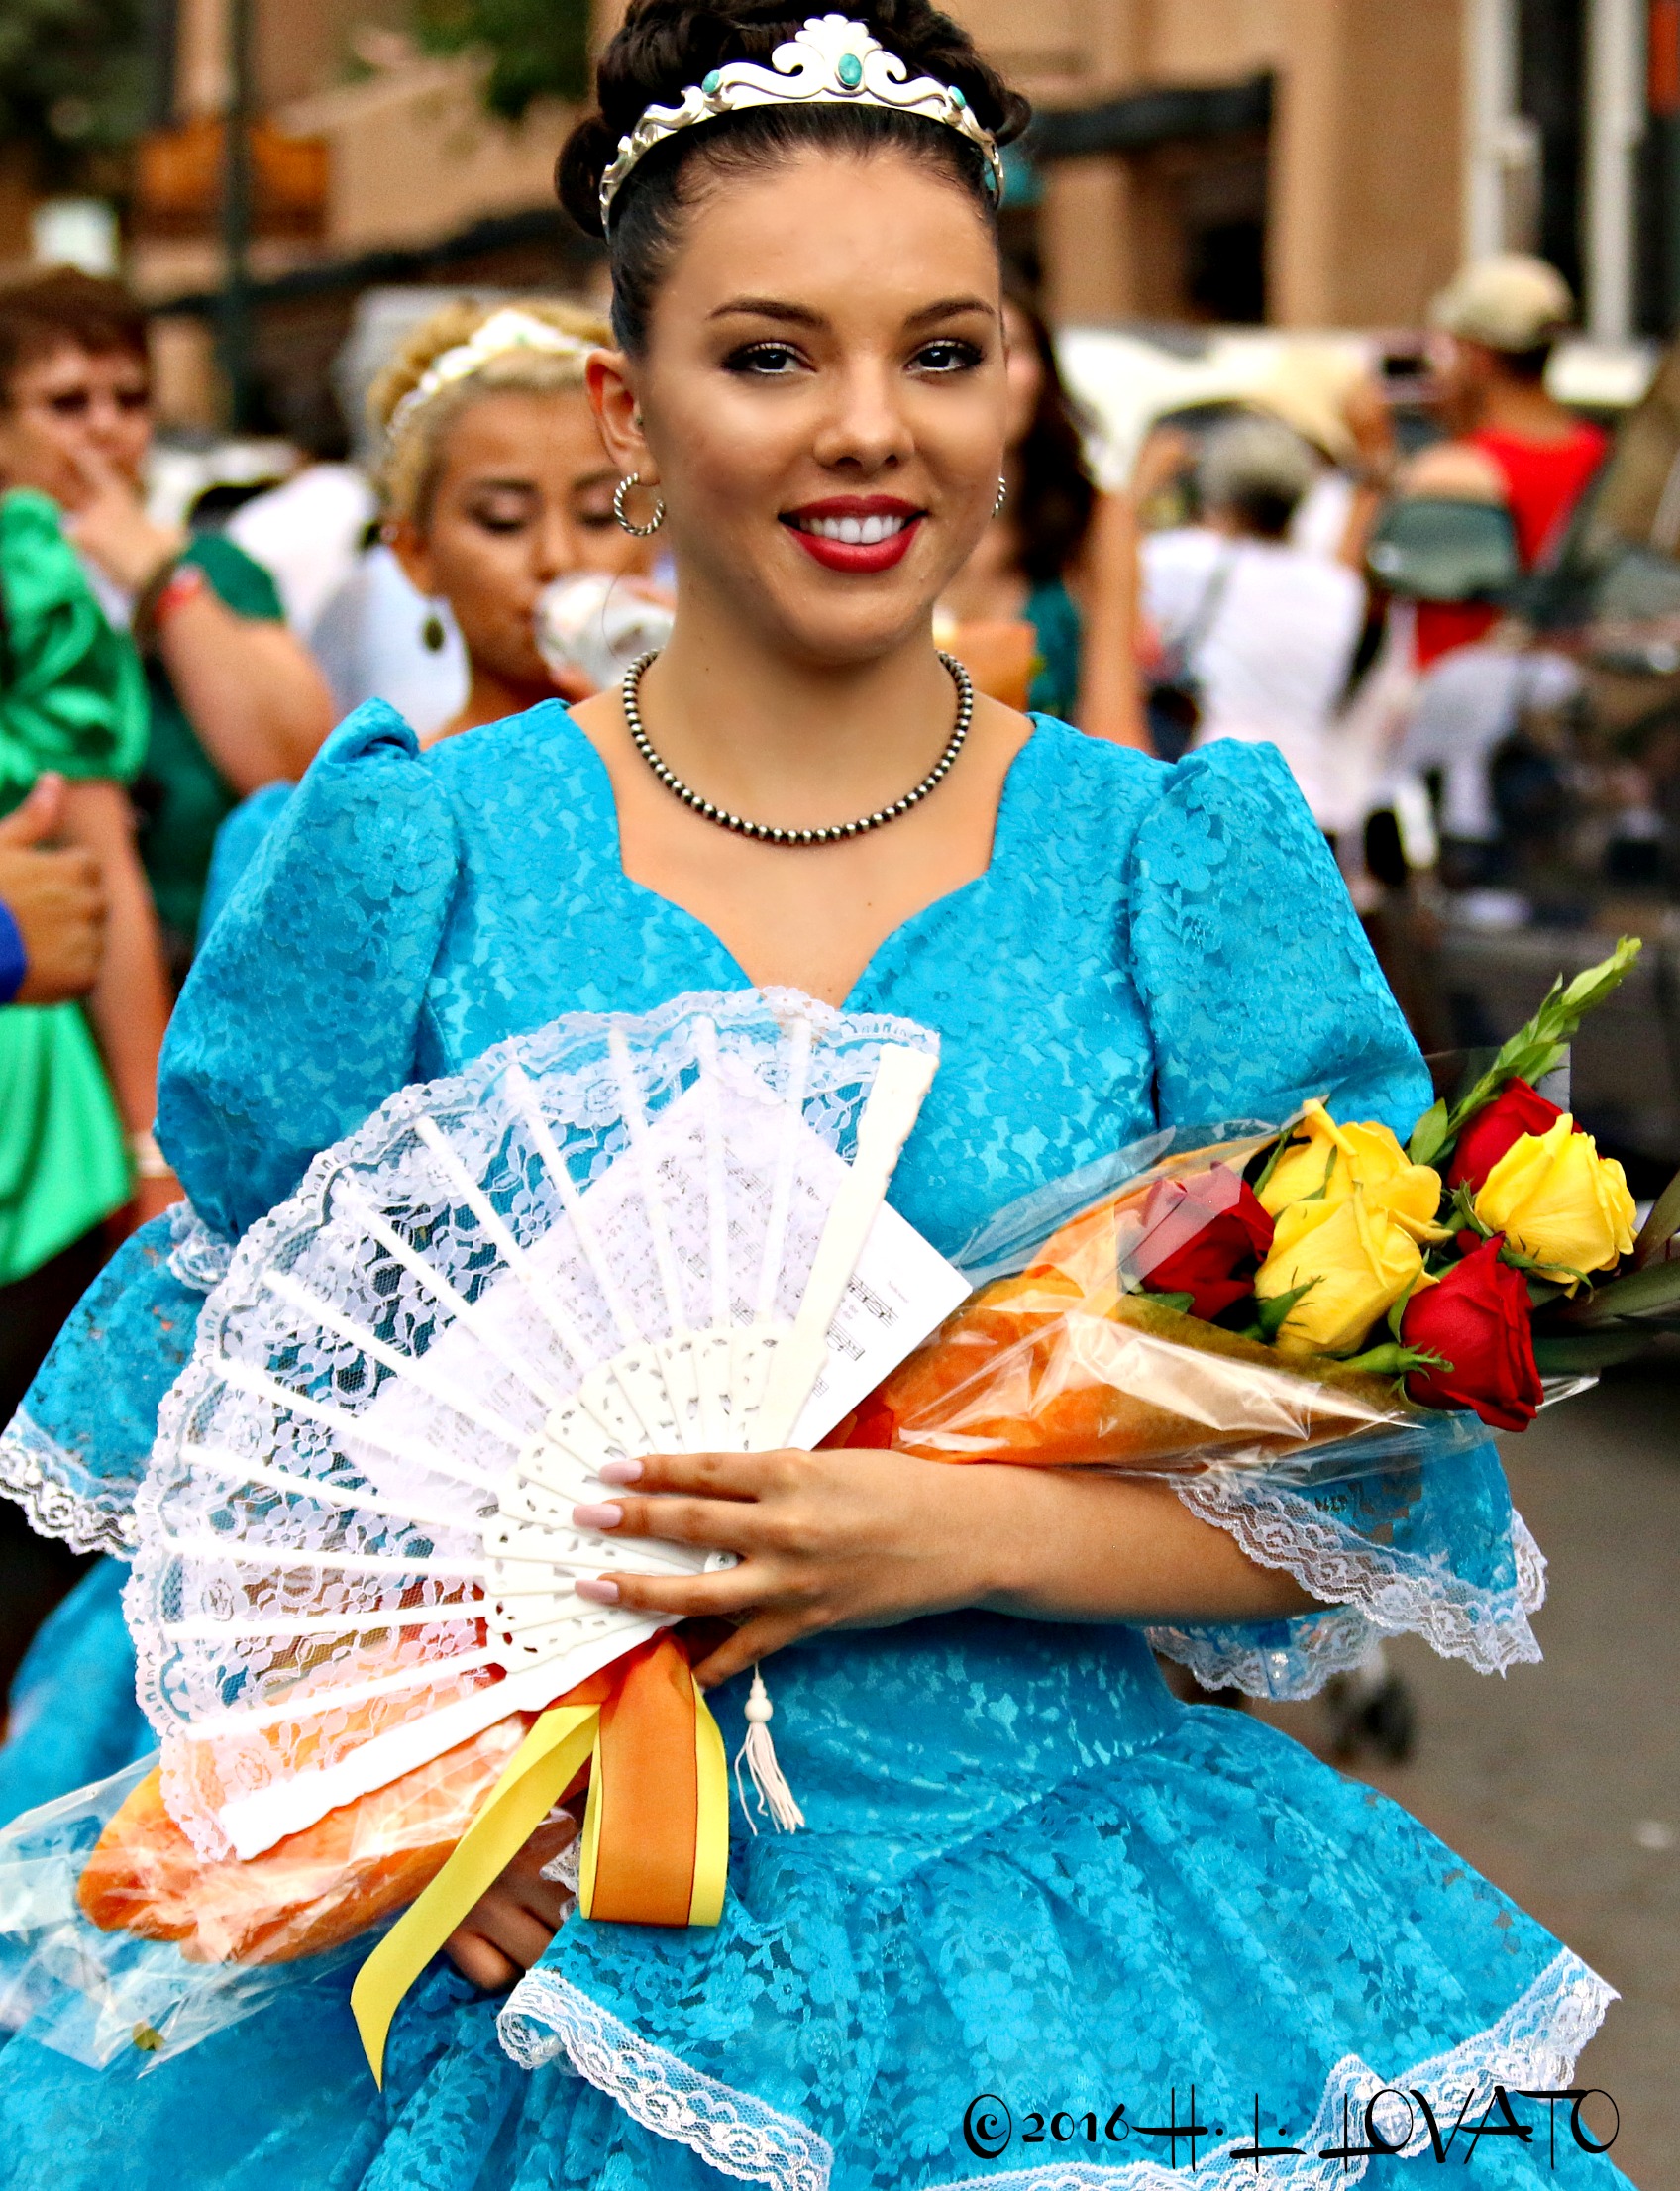 Woman in blue gown holding a bouquet of flowers